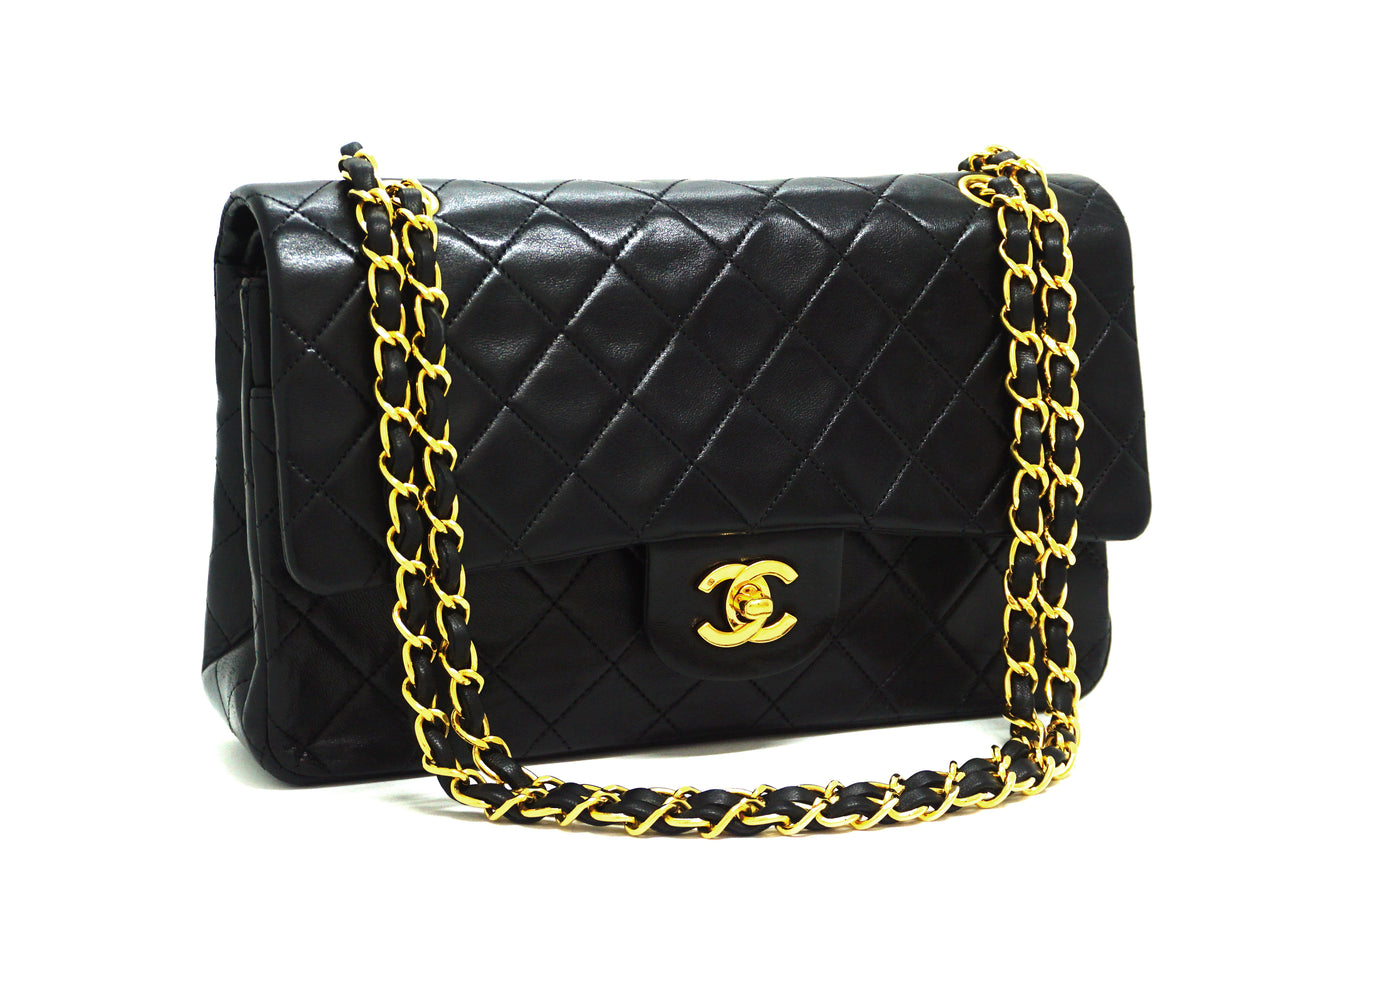 Chanel Vintage Medium Square Classic 2.55 Double Flap Bag in Black Lambskin  with Gold Hardware - SOLD